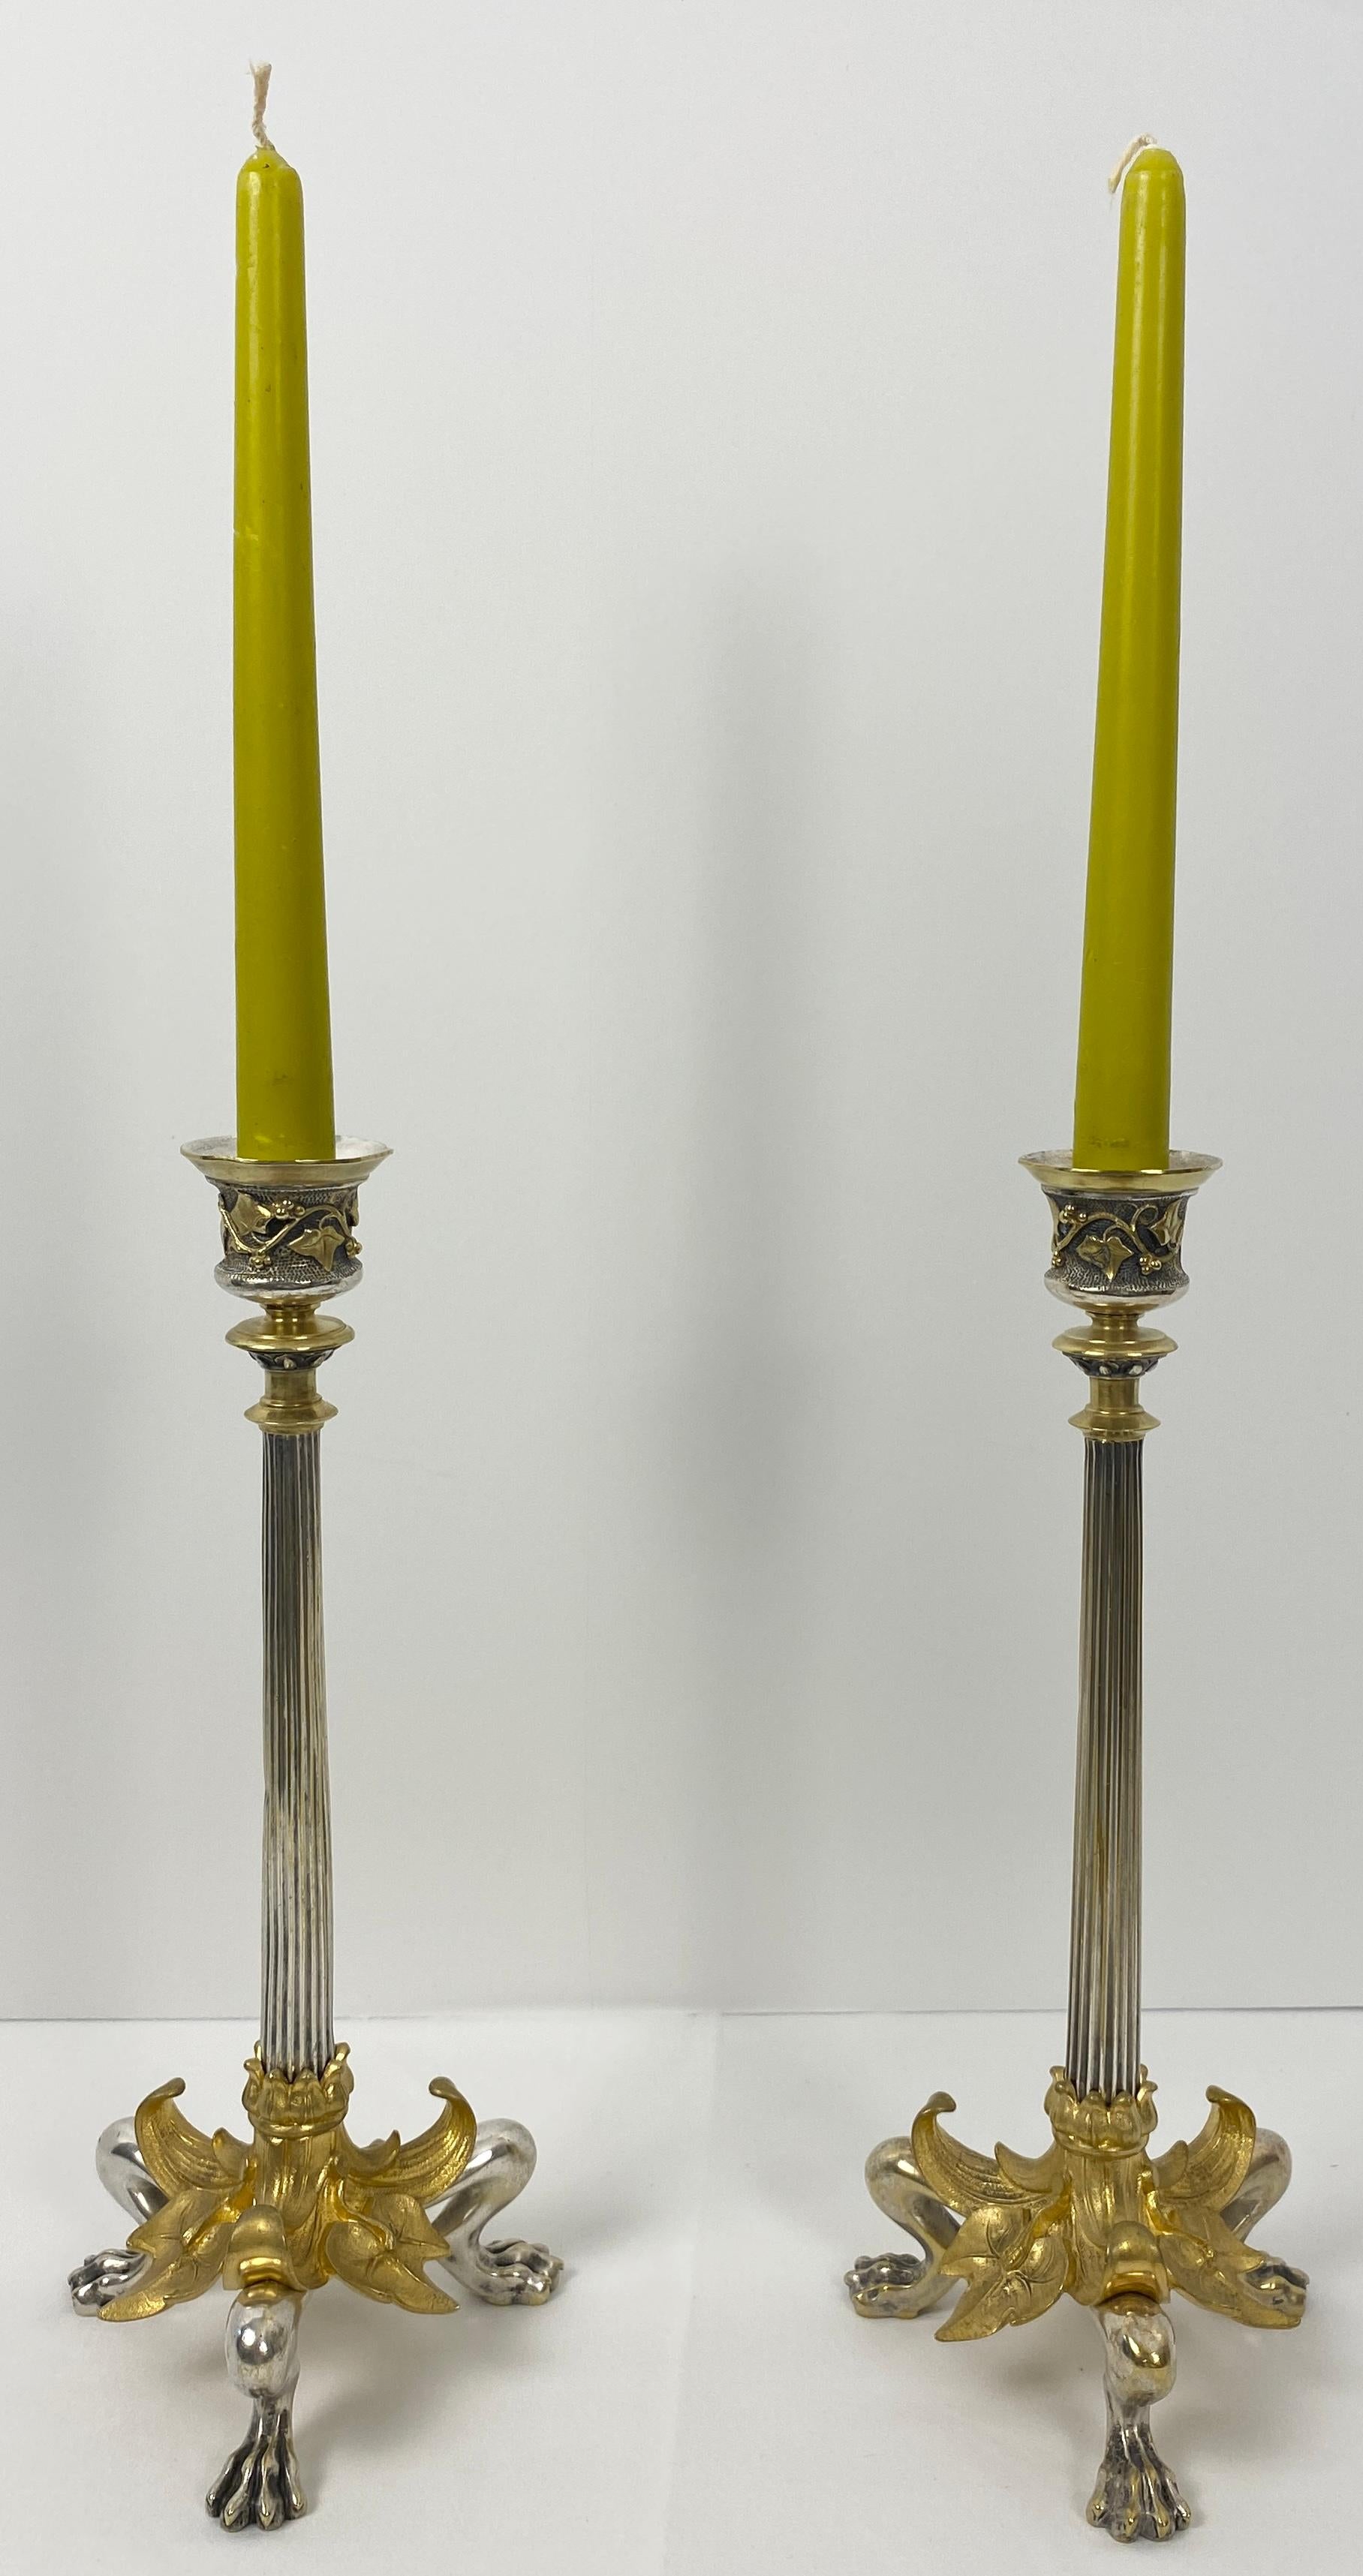 A fine Pair of French Empire gilt bronze candlesticks on hoofed faun feet, late 19th century.

A fluted column rises on three cloven-hoofed hocked faun legs and feet.
These antique candlesticks feature beautiful floral and leaf decors.

Measures: 